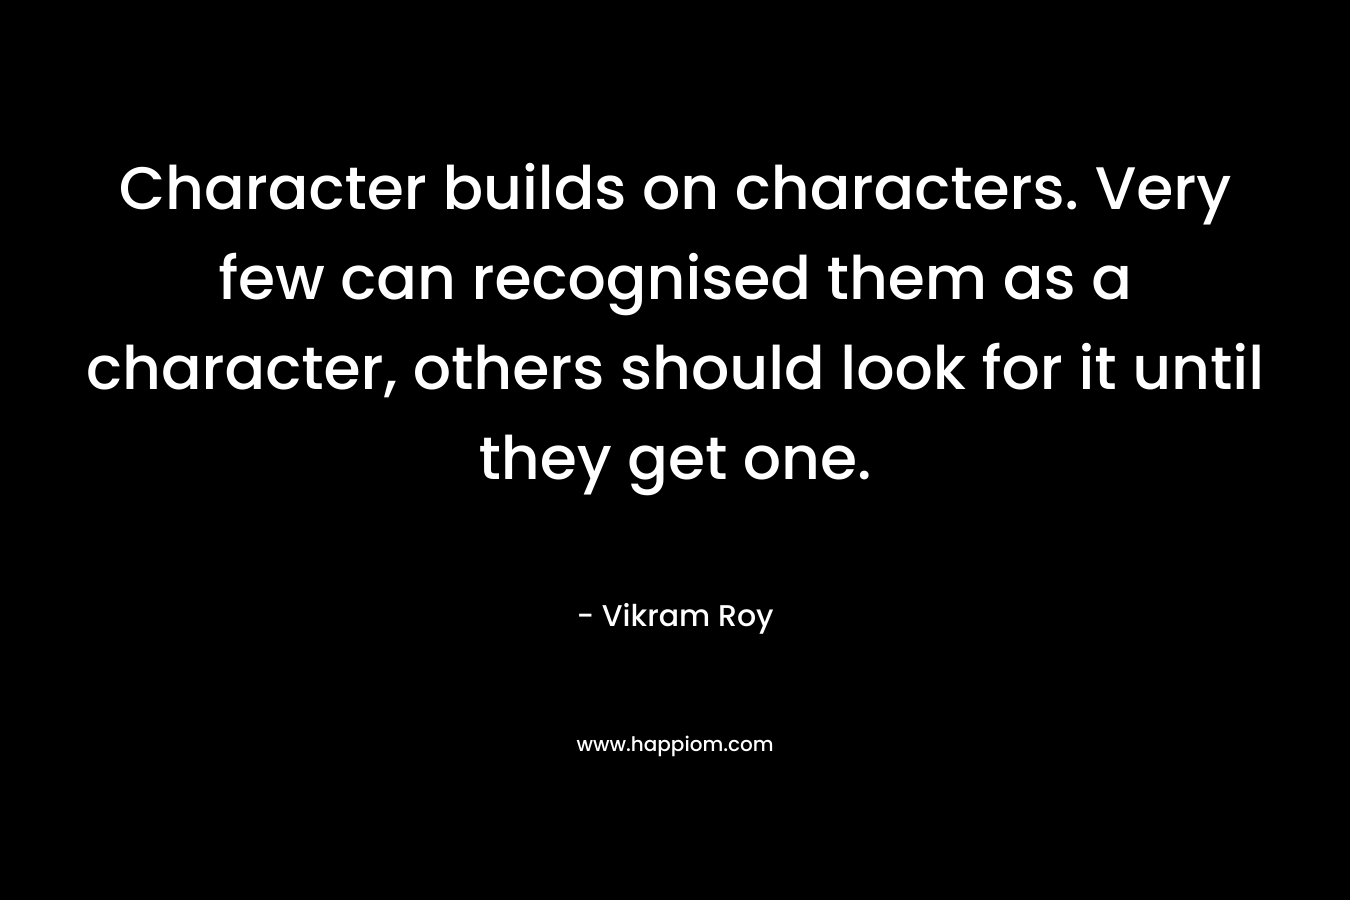 Character builds on characters. Very few can recognised them as a character, others should look for it until they get one.